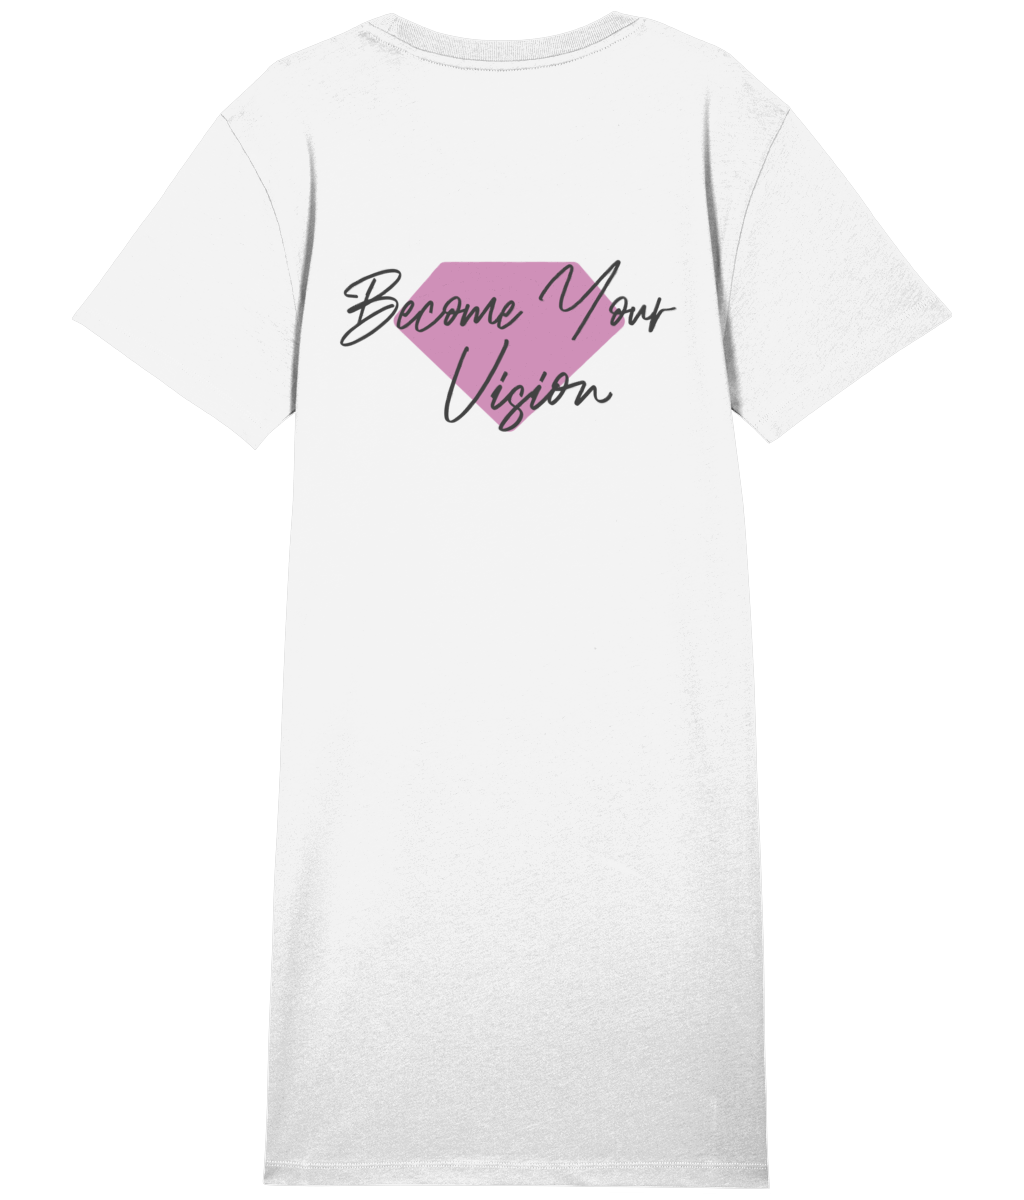 BECOME YOUR VISION T-SHIRT DRESS